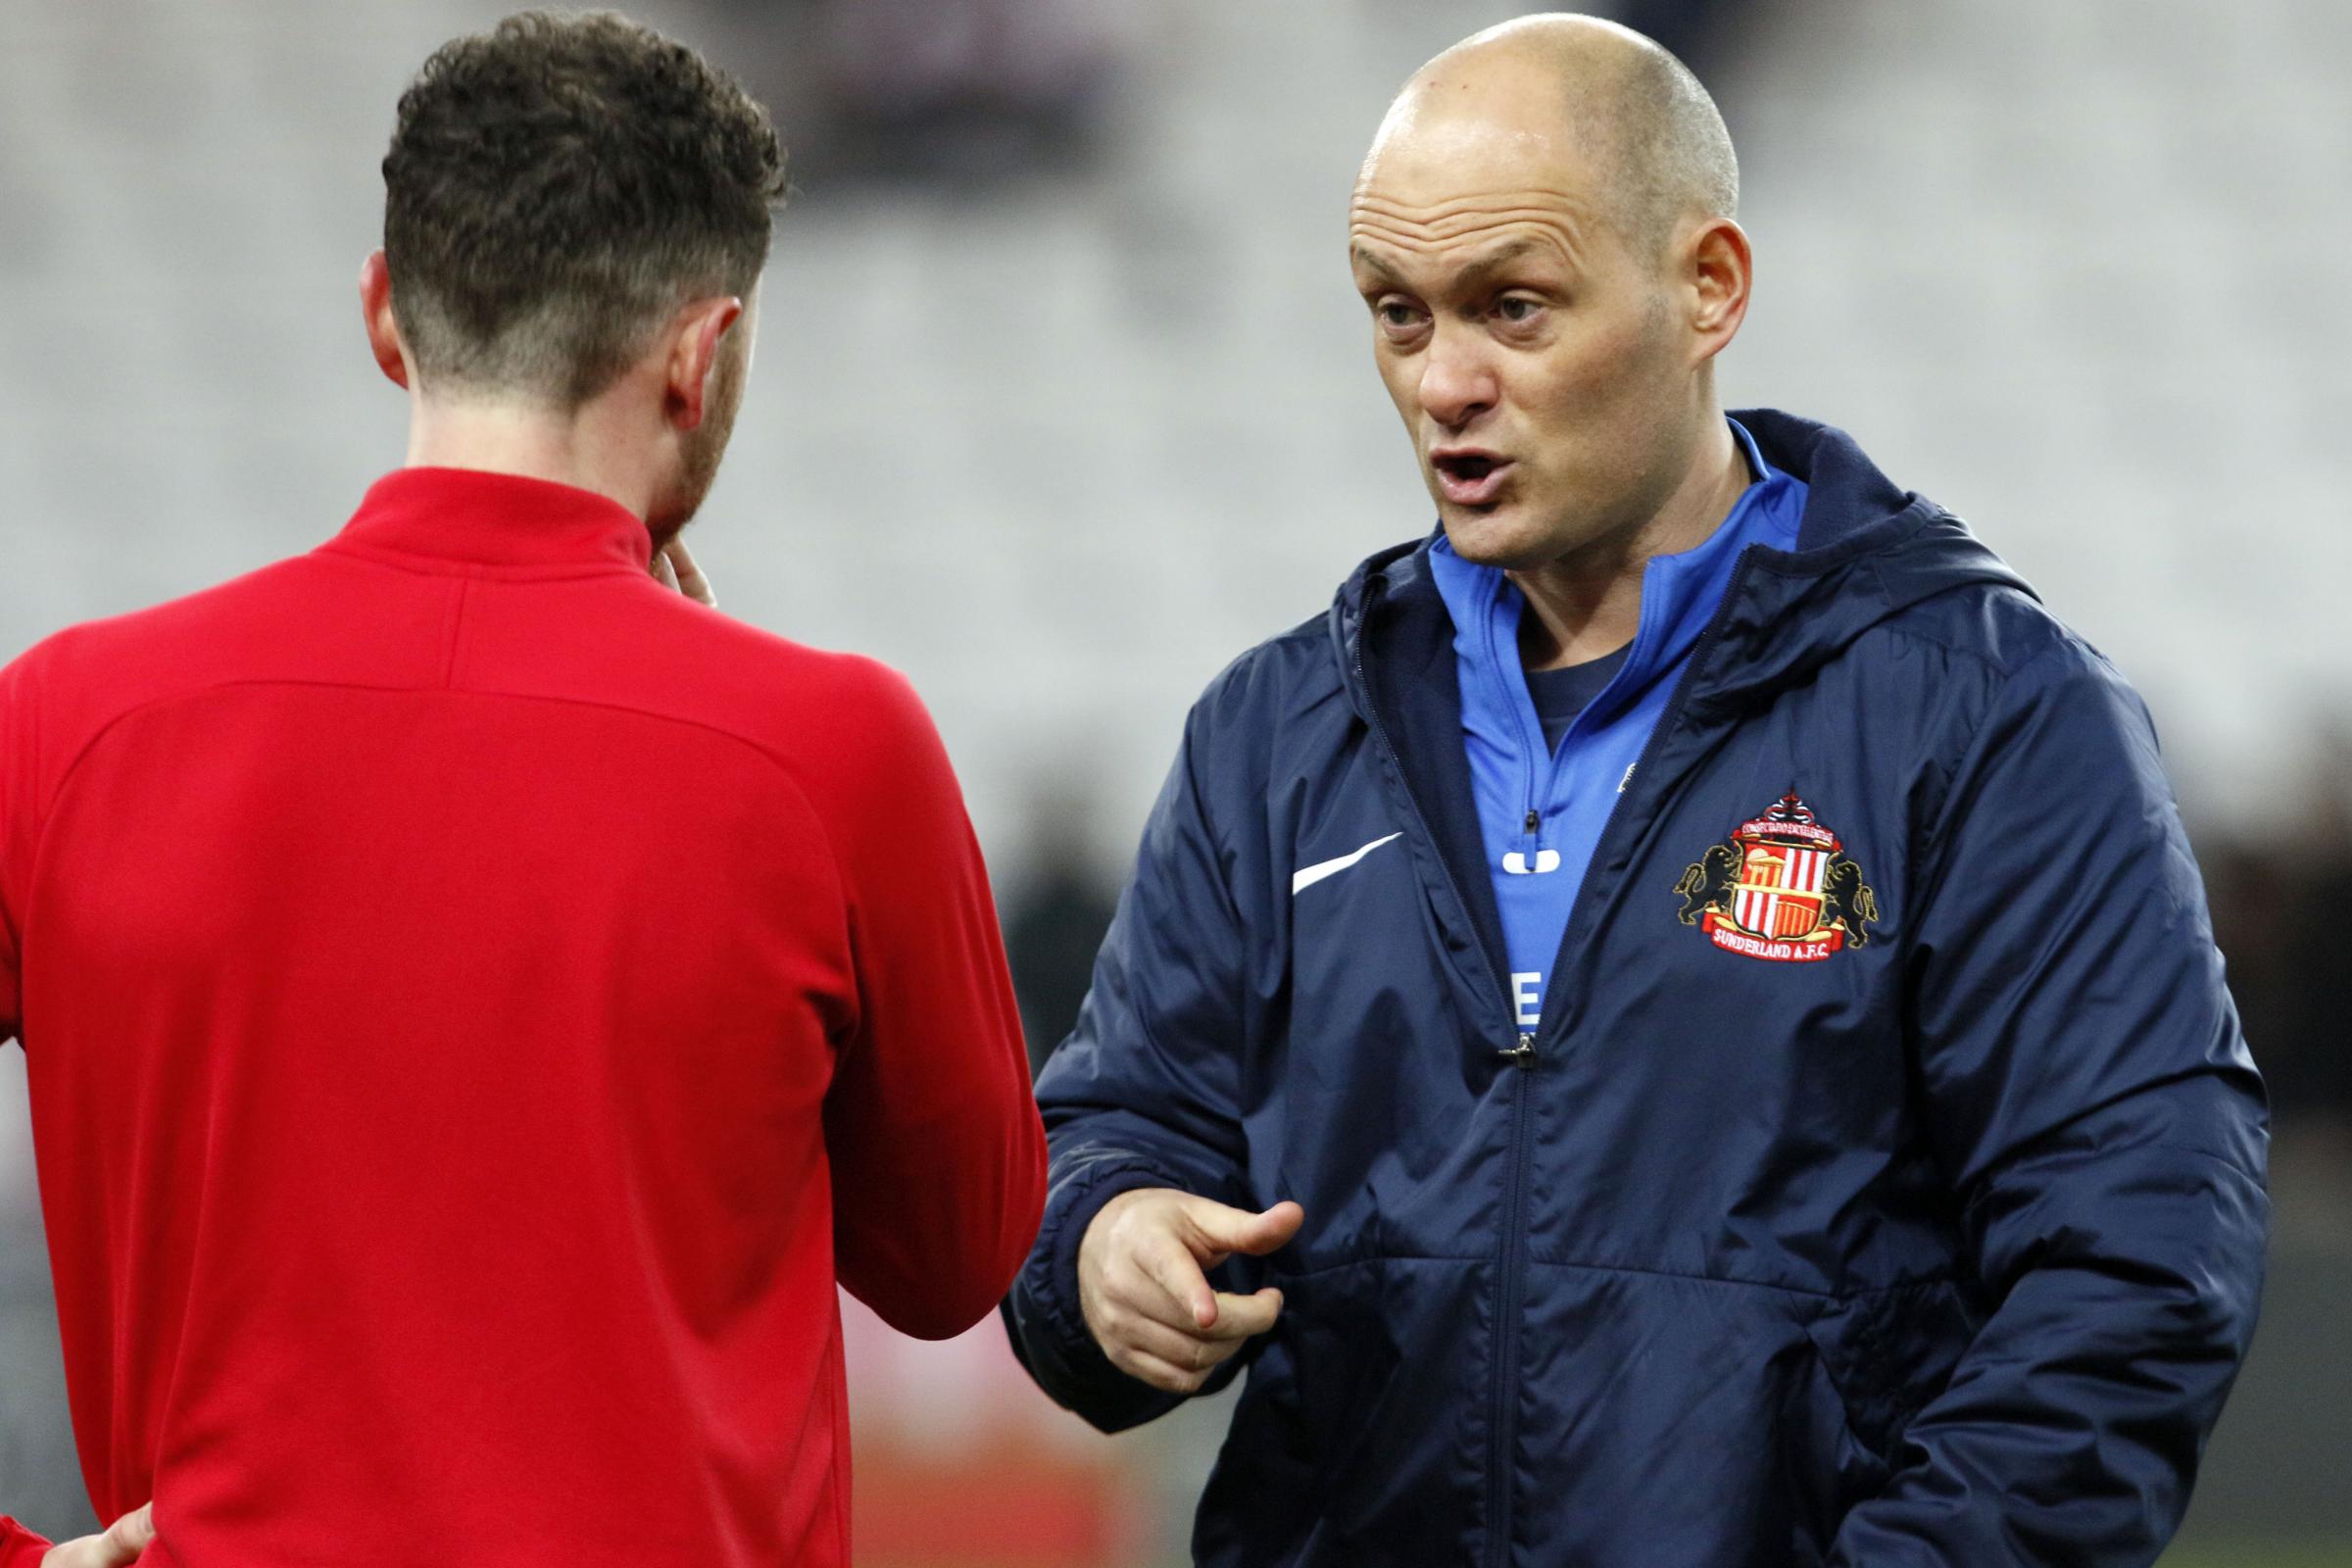 'Back to the drawing board' for Alex Neil and Sunderland as poor form continues